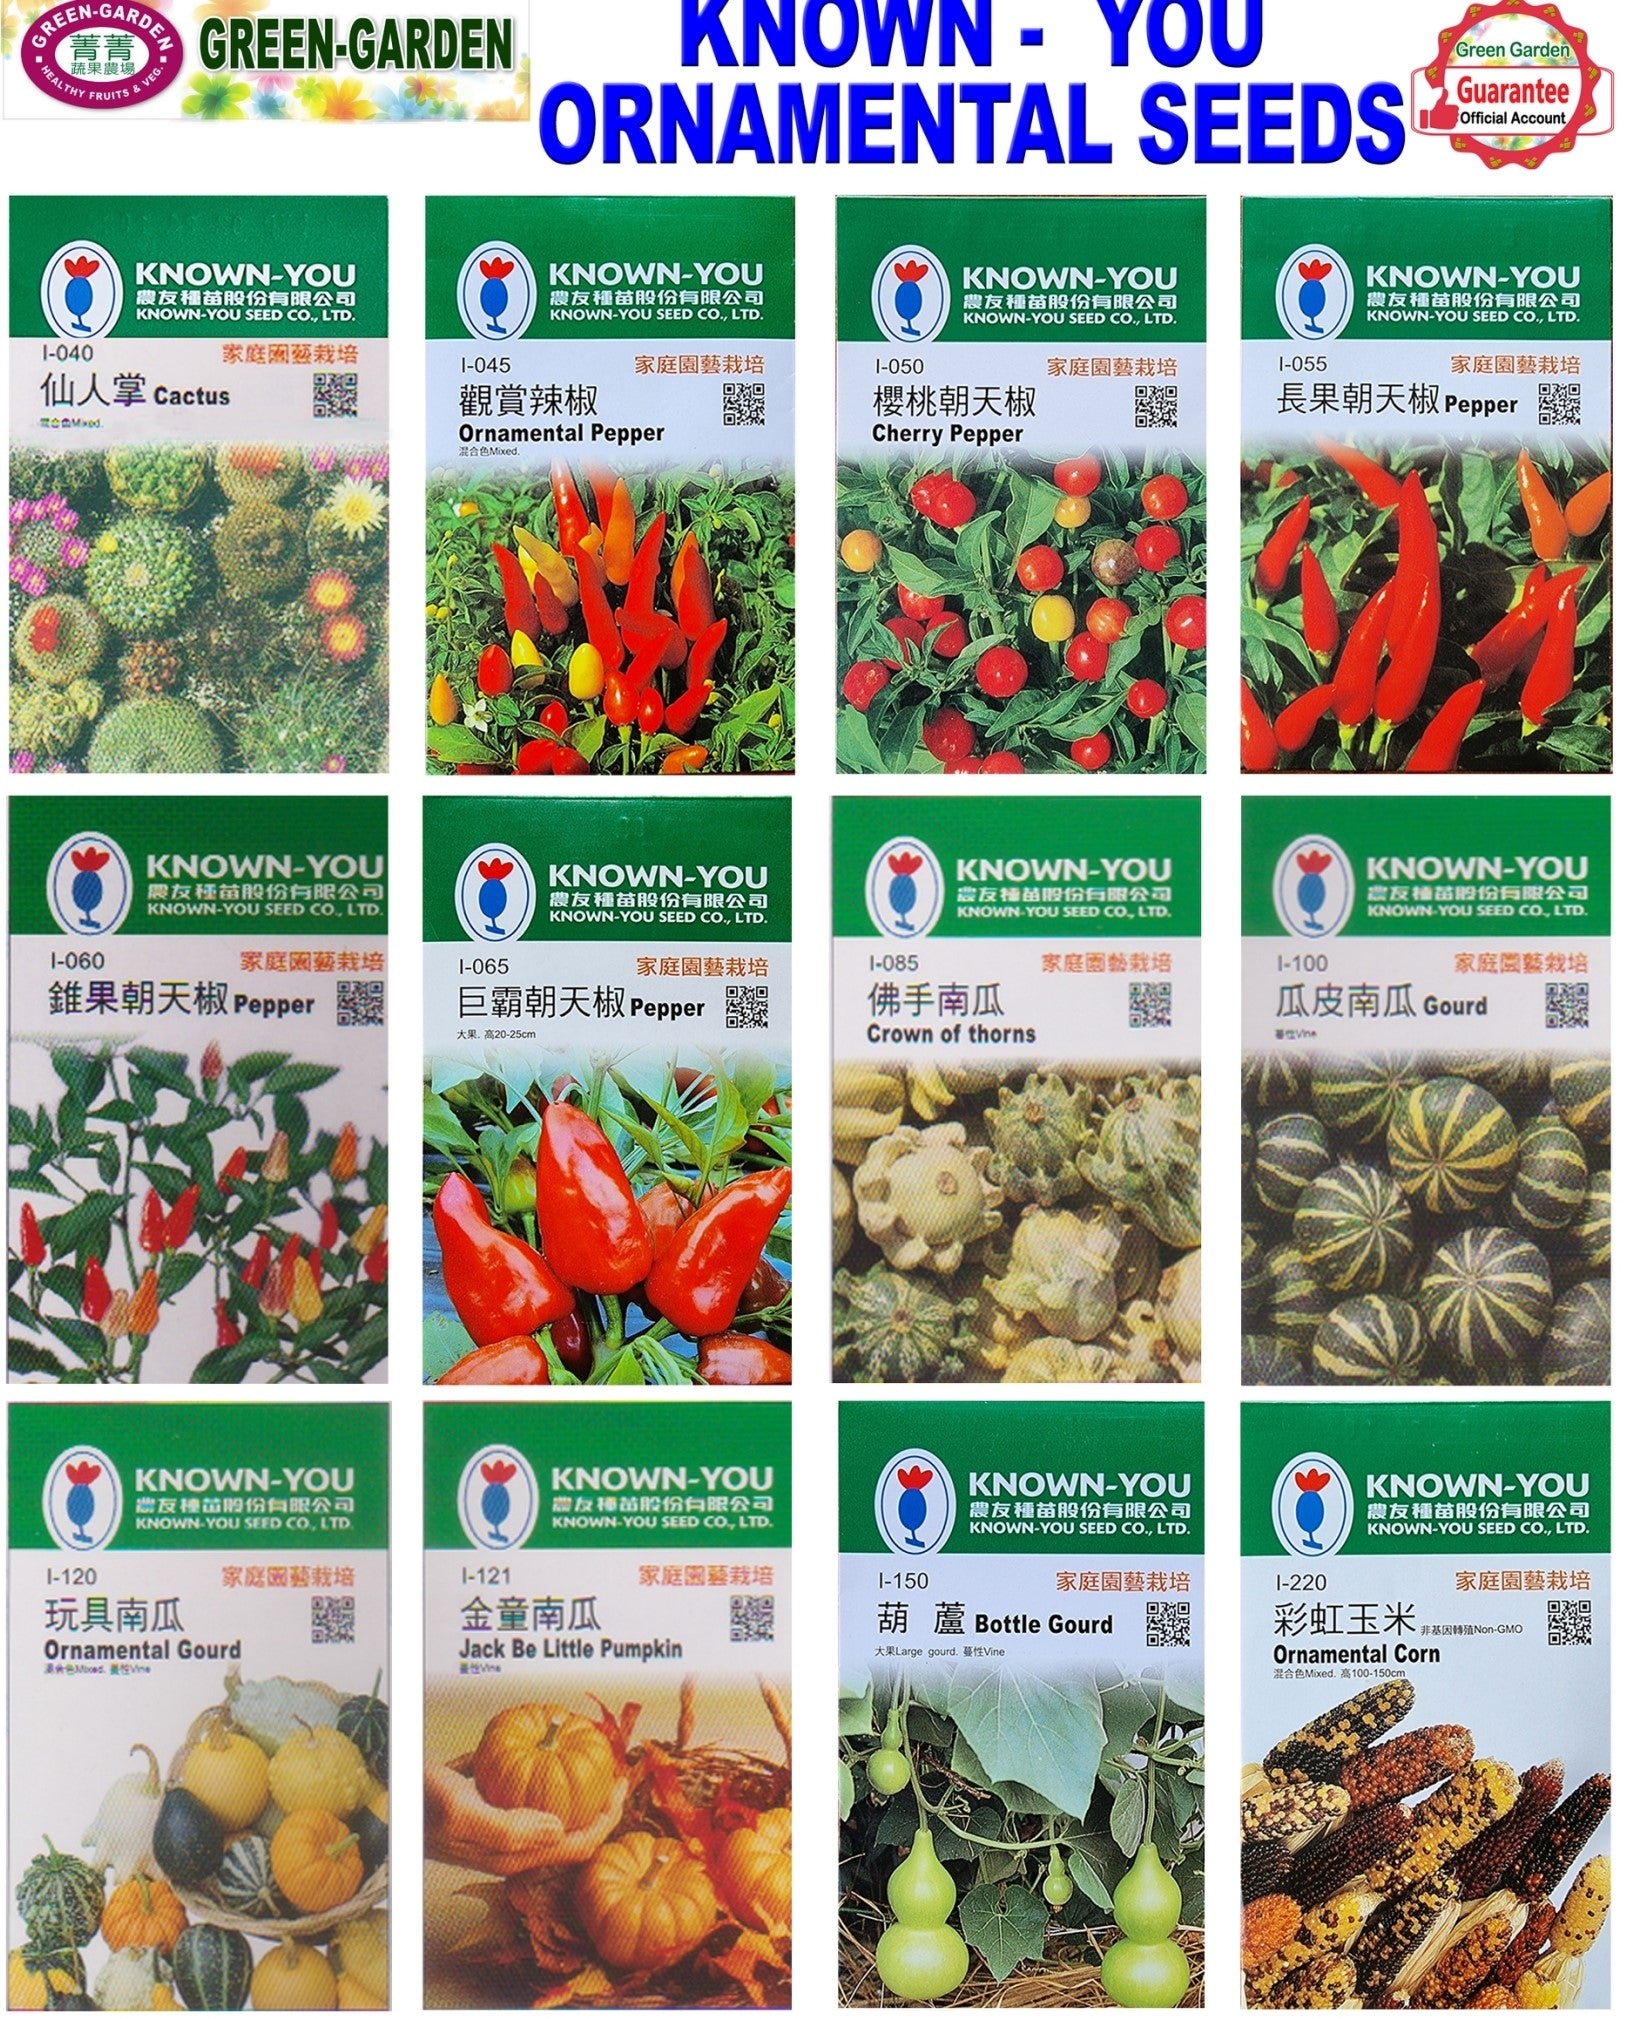 Known You Ornamental Seeds (I-055 Pepper)